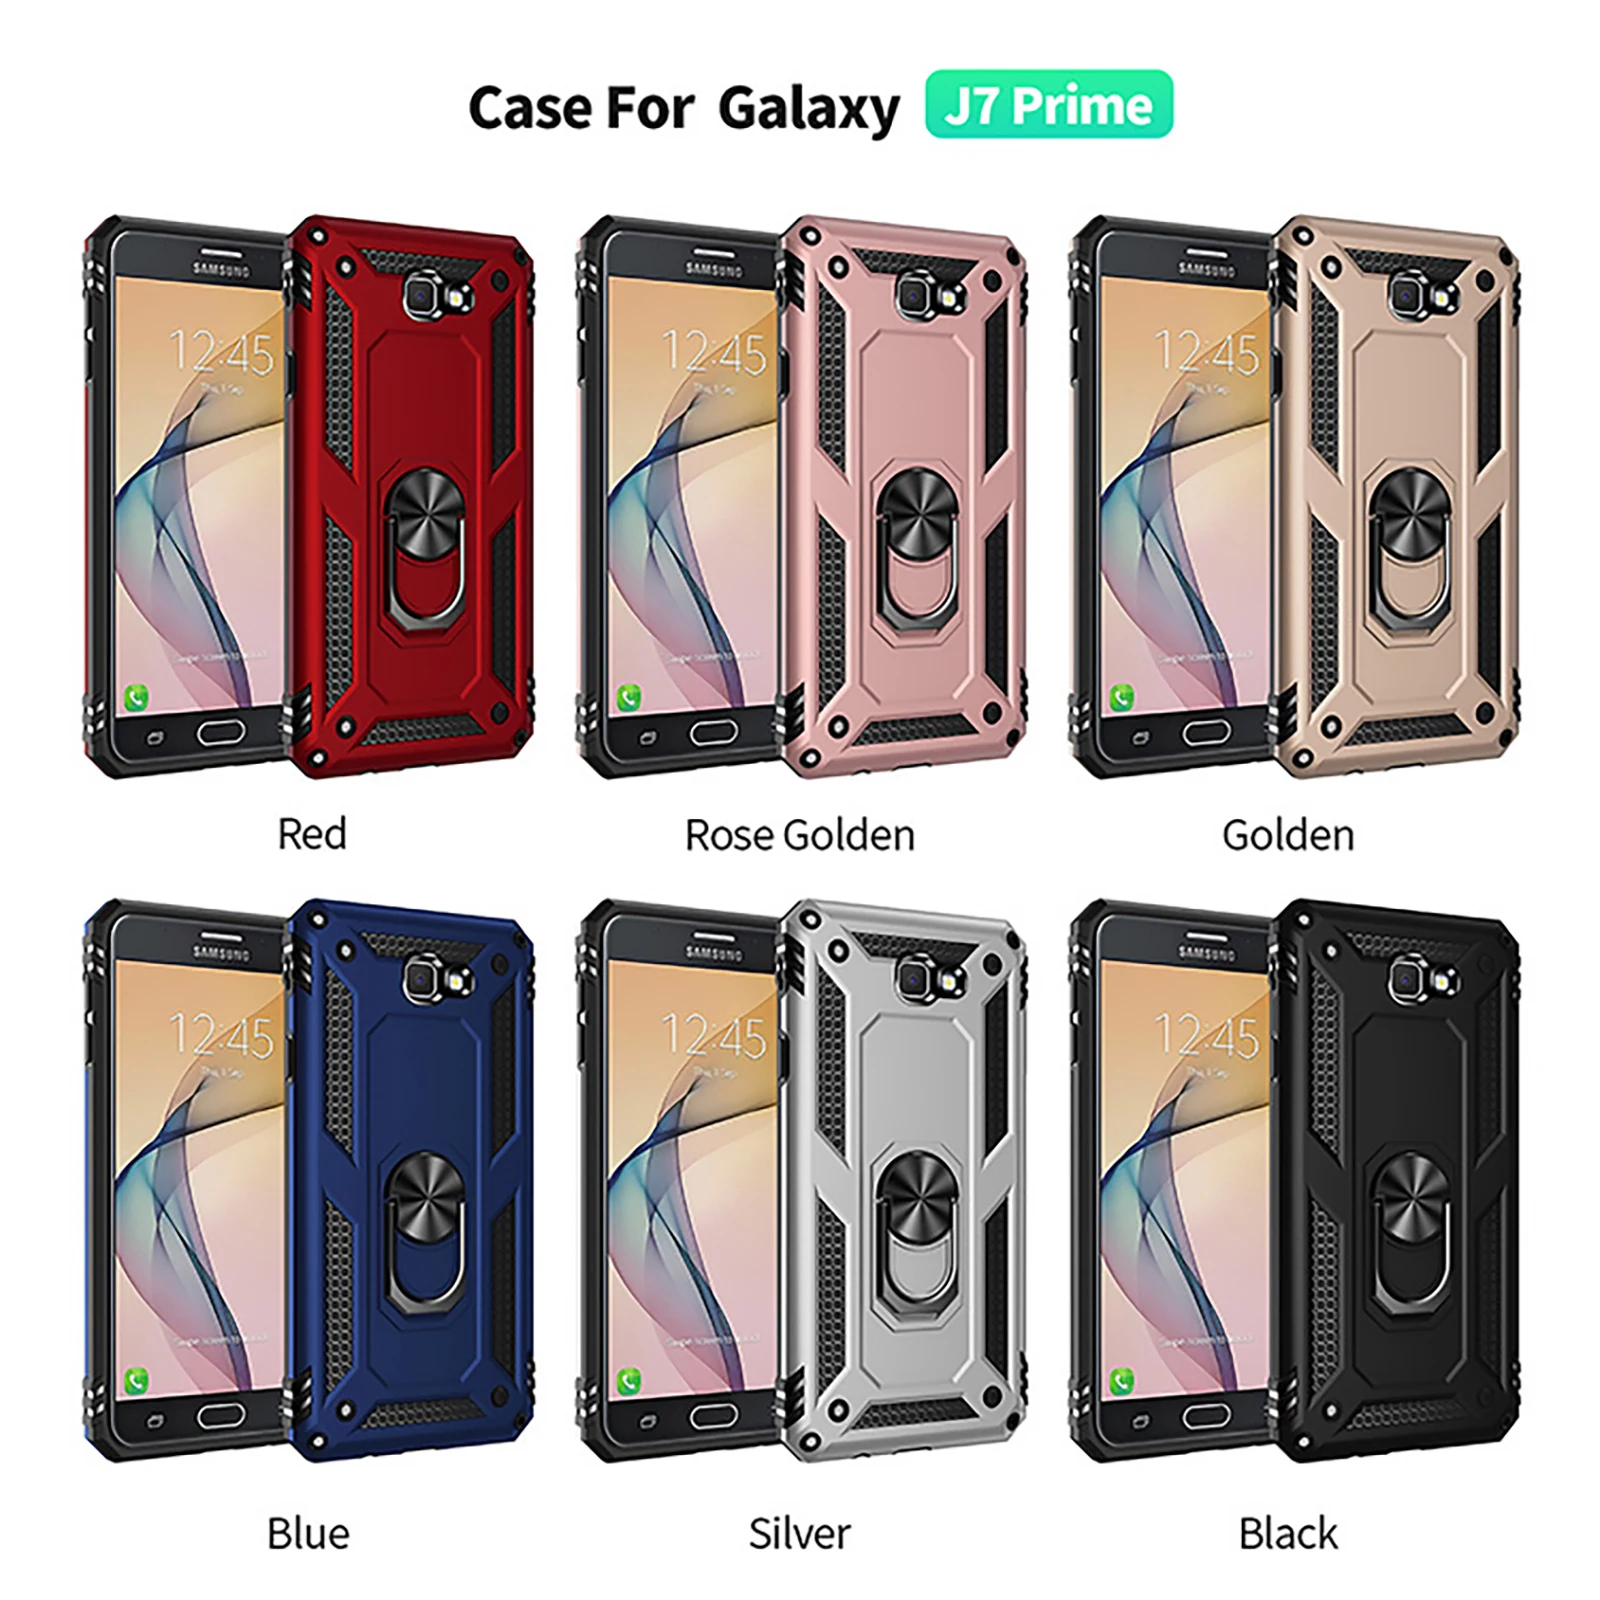 

Bracket Magnetic Protect Hard Shell For Samsung Galaxy Phones Case Cover S10 S10E S10Plus S9Plus S8 S8Plus S7 S7edge S6 S6edge